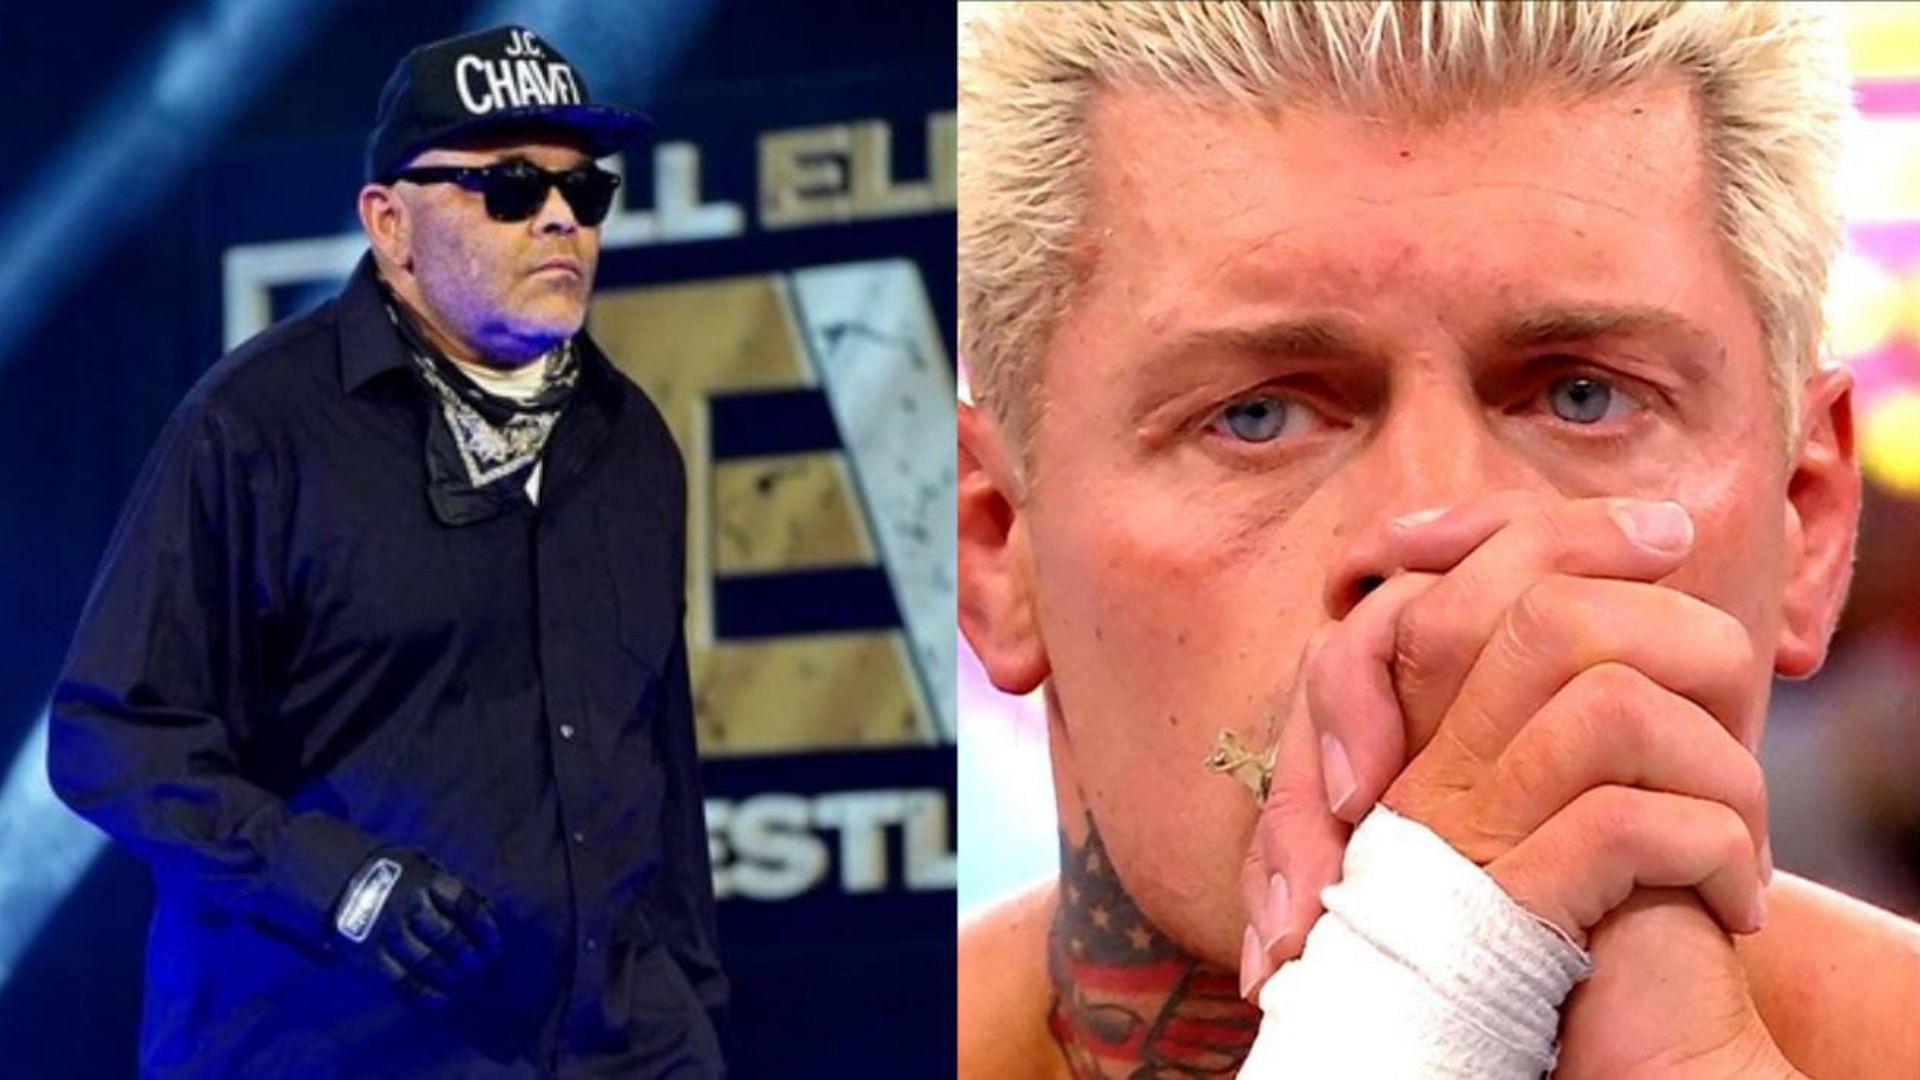 Konnan has weighed in on an AEW star